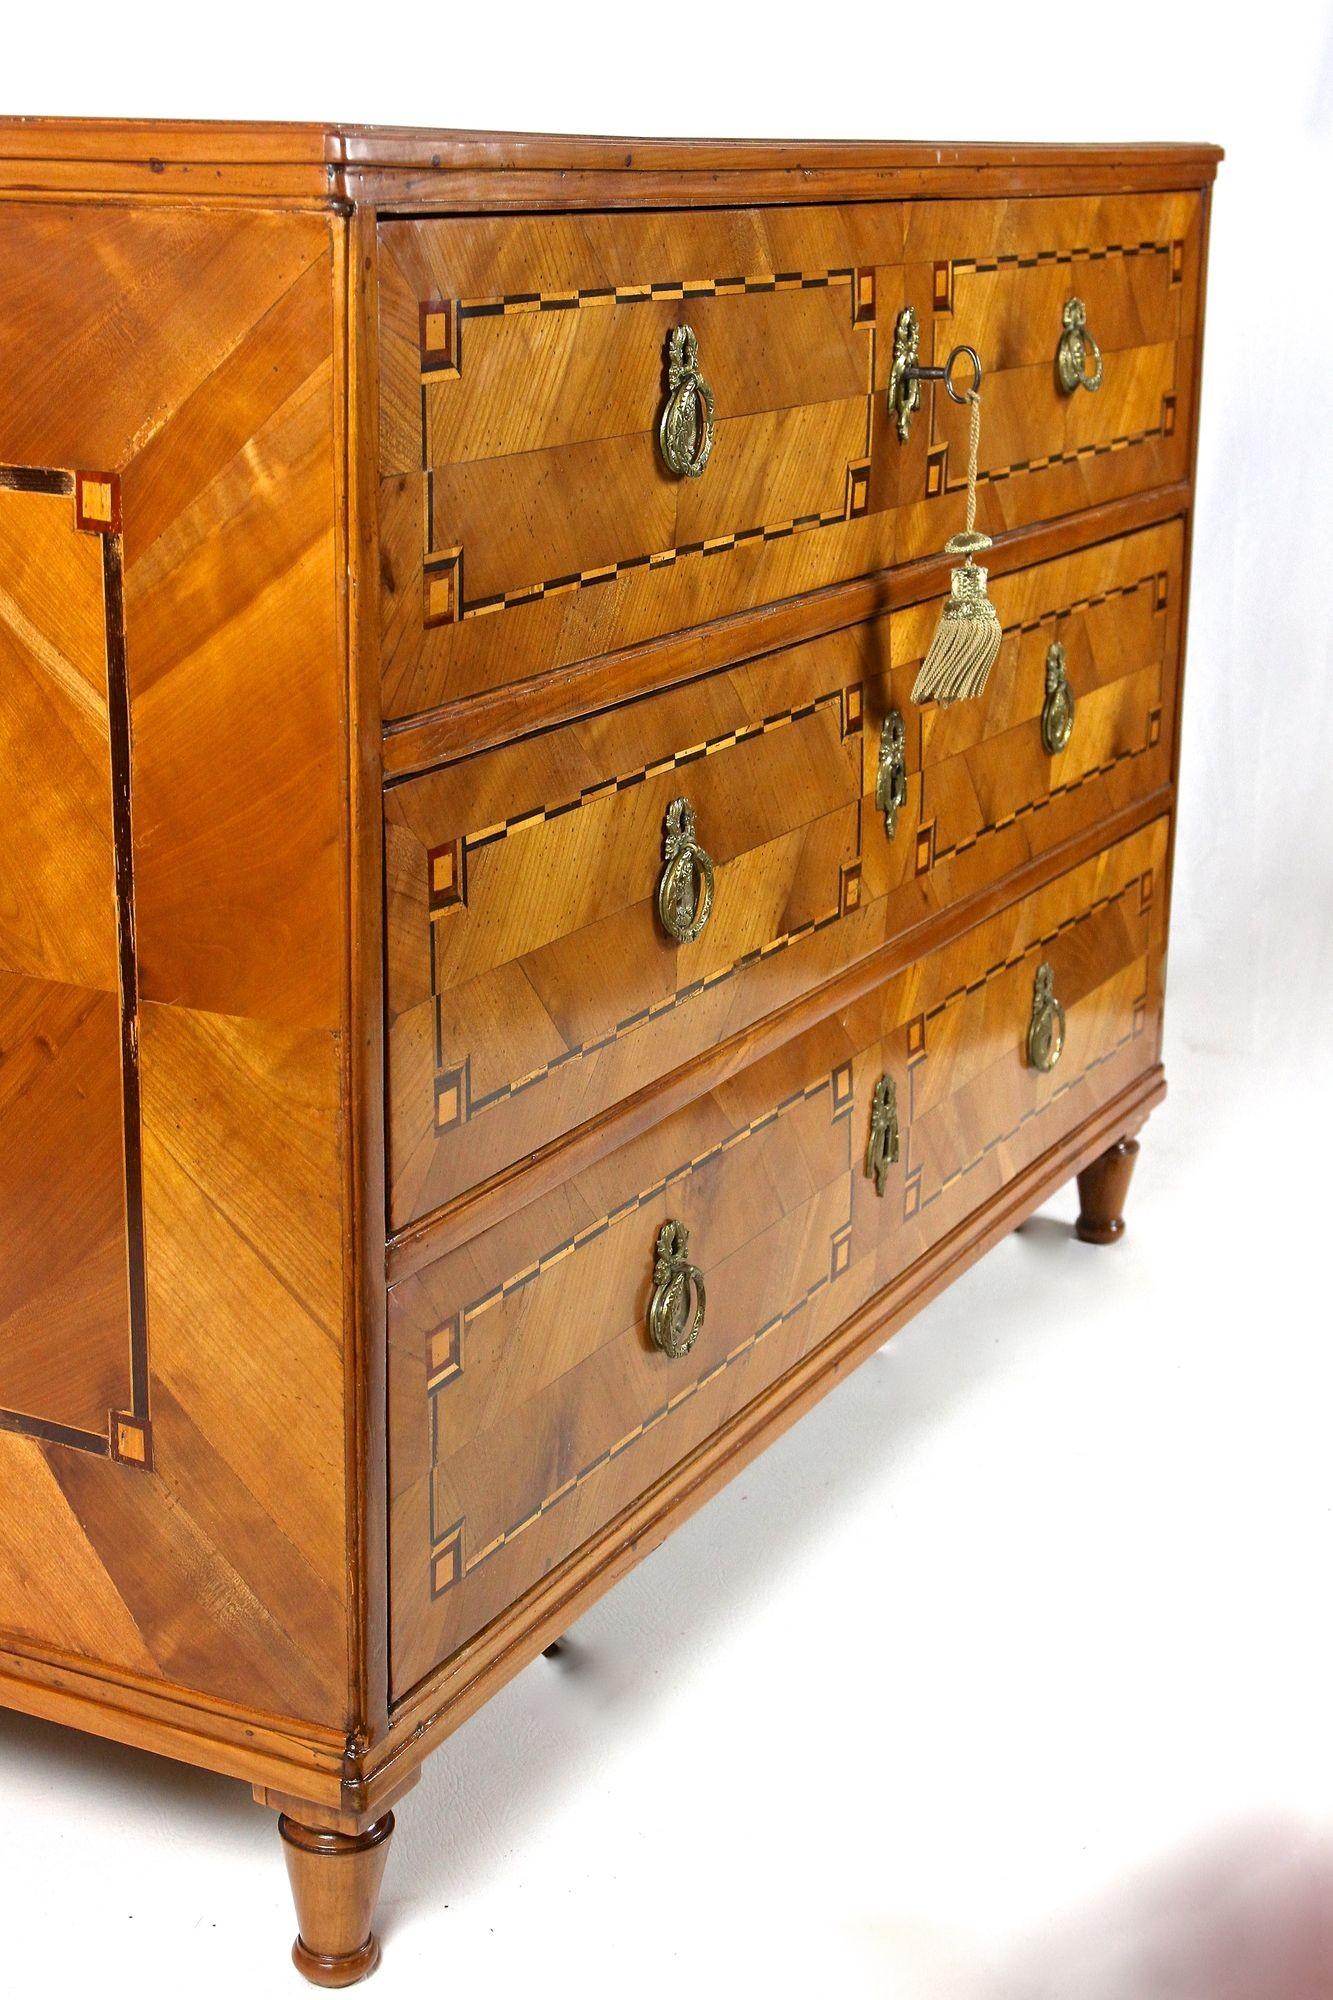 18th Century Cherrywood Chest of Drawers, Josephinism Period, Austria circa 1790 For Sale 7